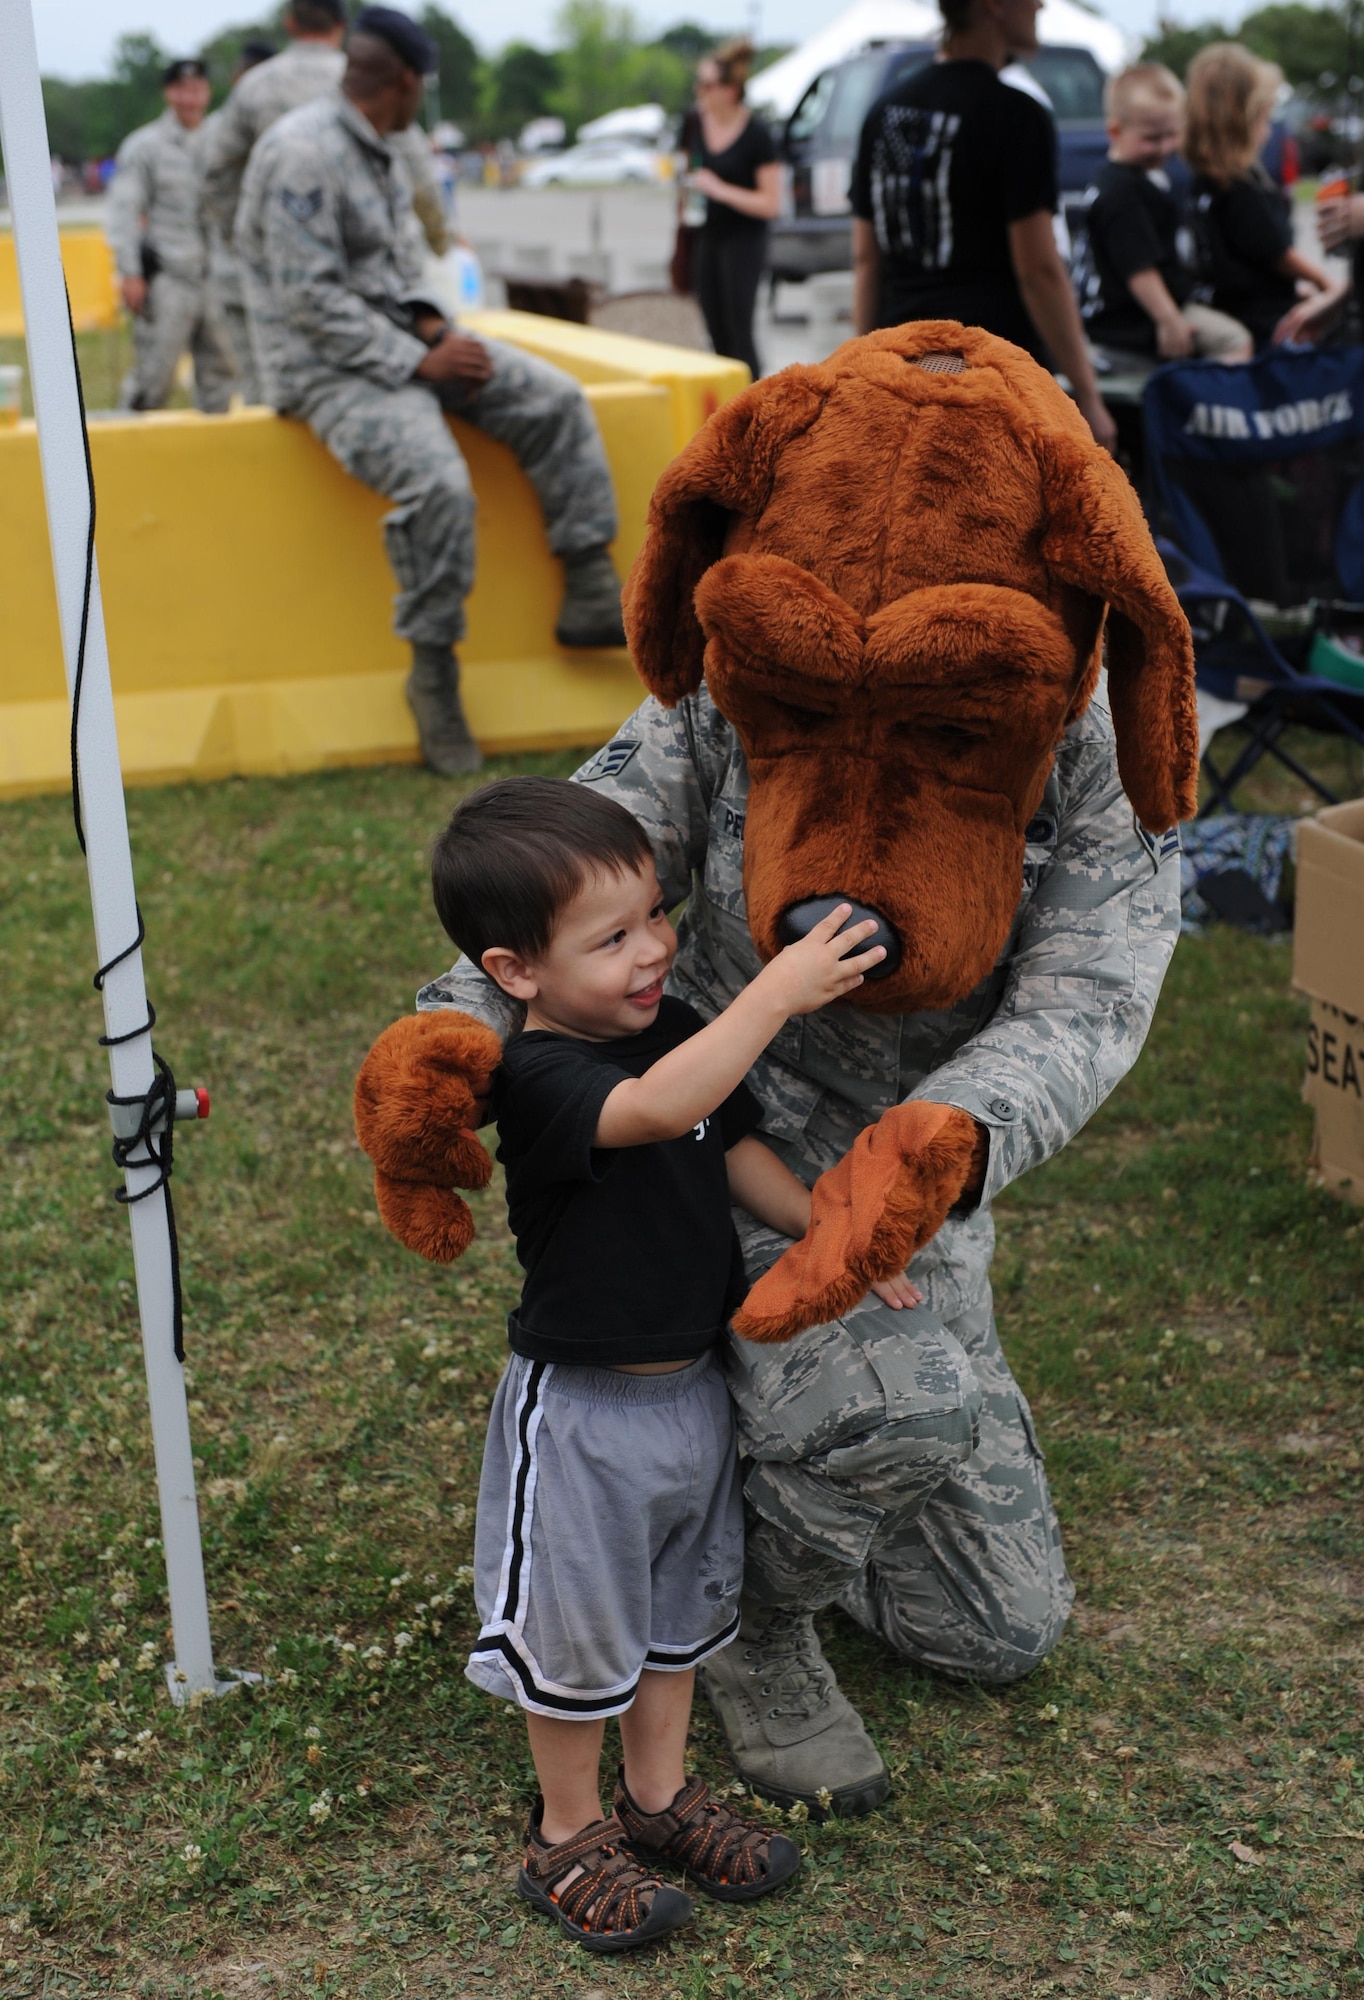 Milo Pedroza, son of Senior Airman Elizabeth Pedroza, 81st Security Forces Squadron entry controller, receives a hug from McGruff the Crime Dog during the 81st SFS Fun Day at the base exchange May 16, 2016, Keesler Air Force Base, Miss. The event was held during National Police Week, which recognizes the service of law enforcement men and women who put their lives at risk every day. (U.S. Air Force photo by Kemberly Groue)